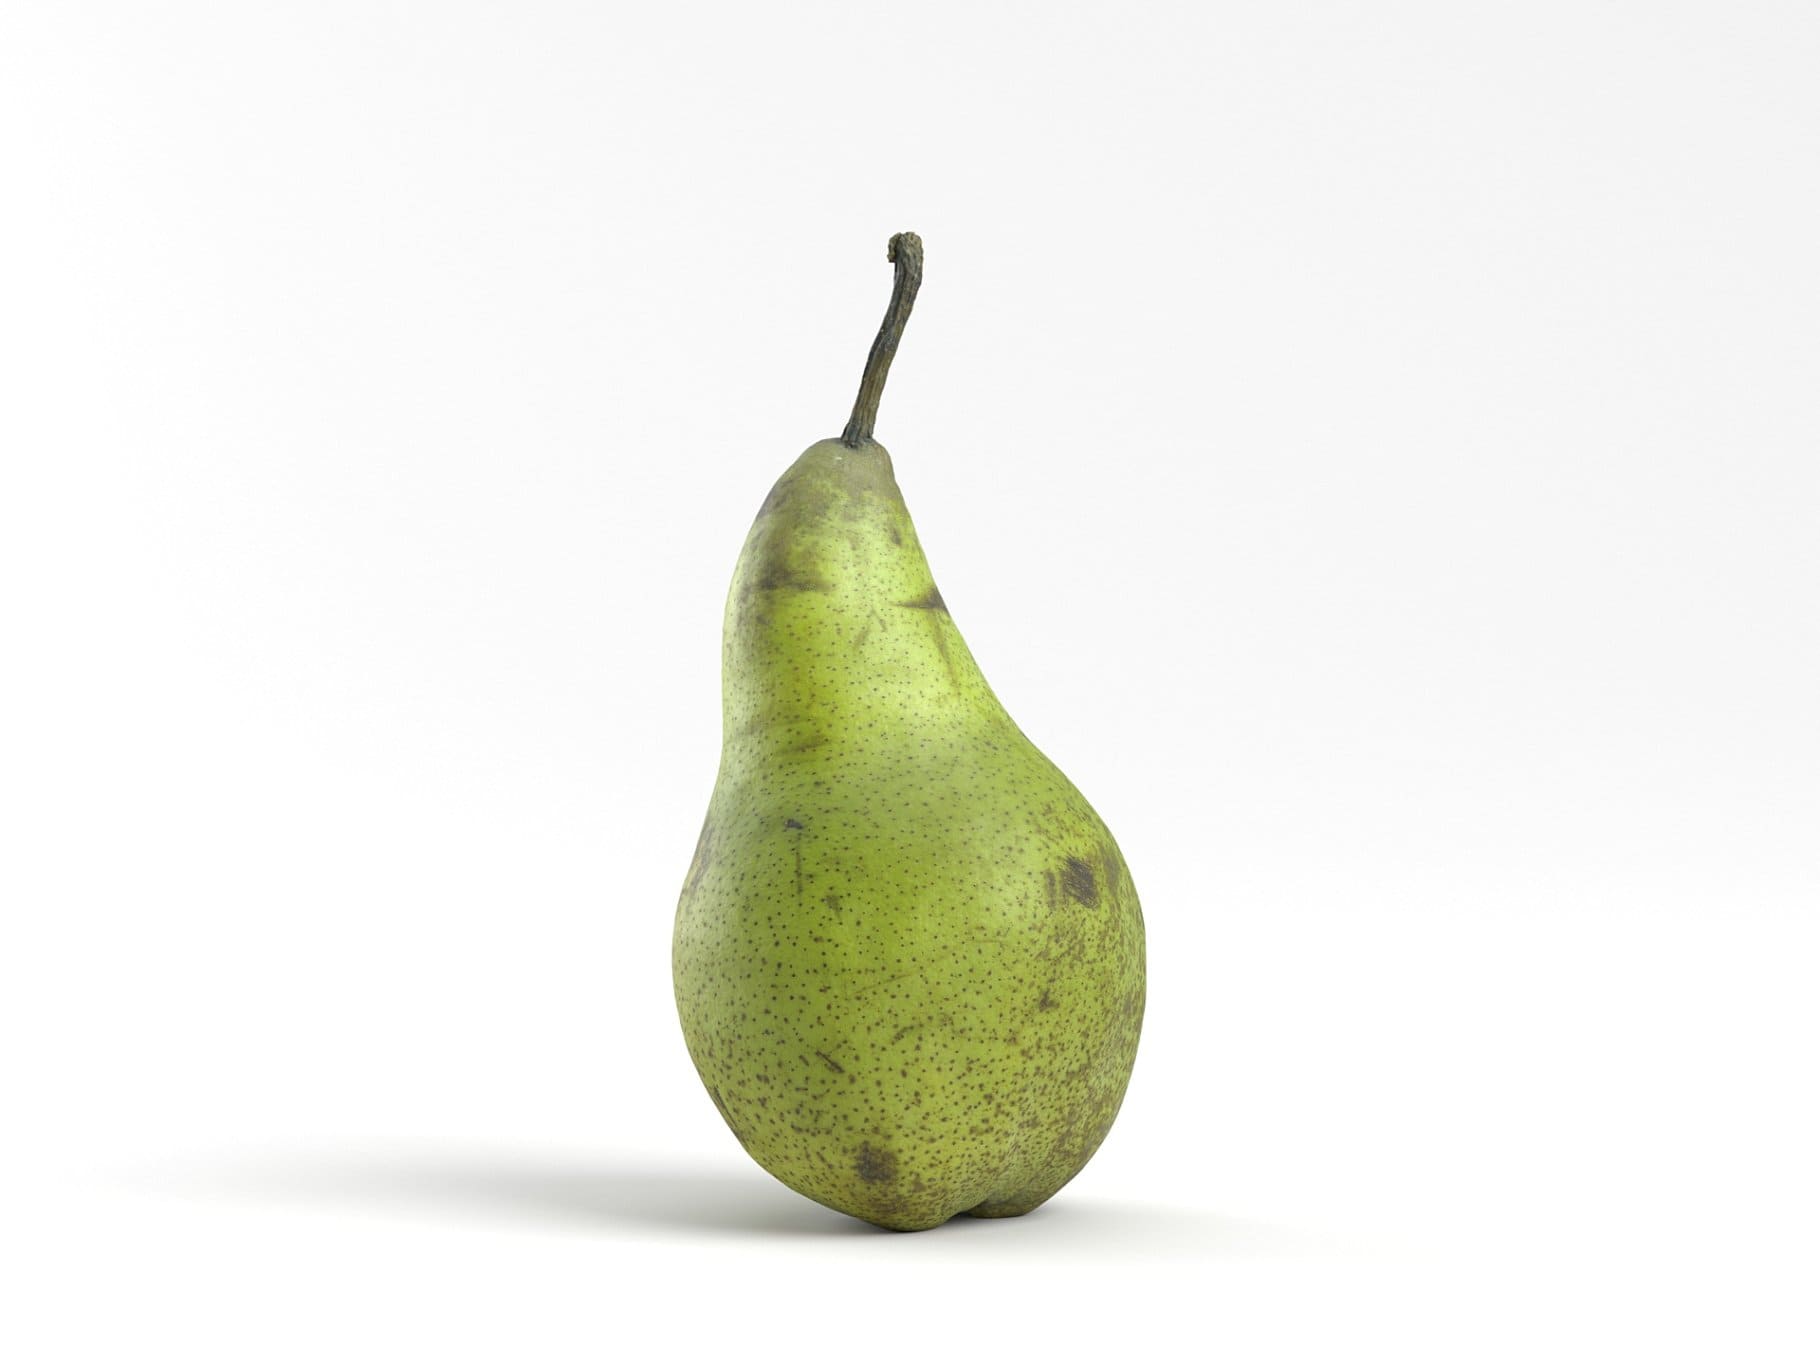 Green pear on a white background.